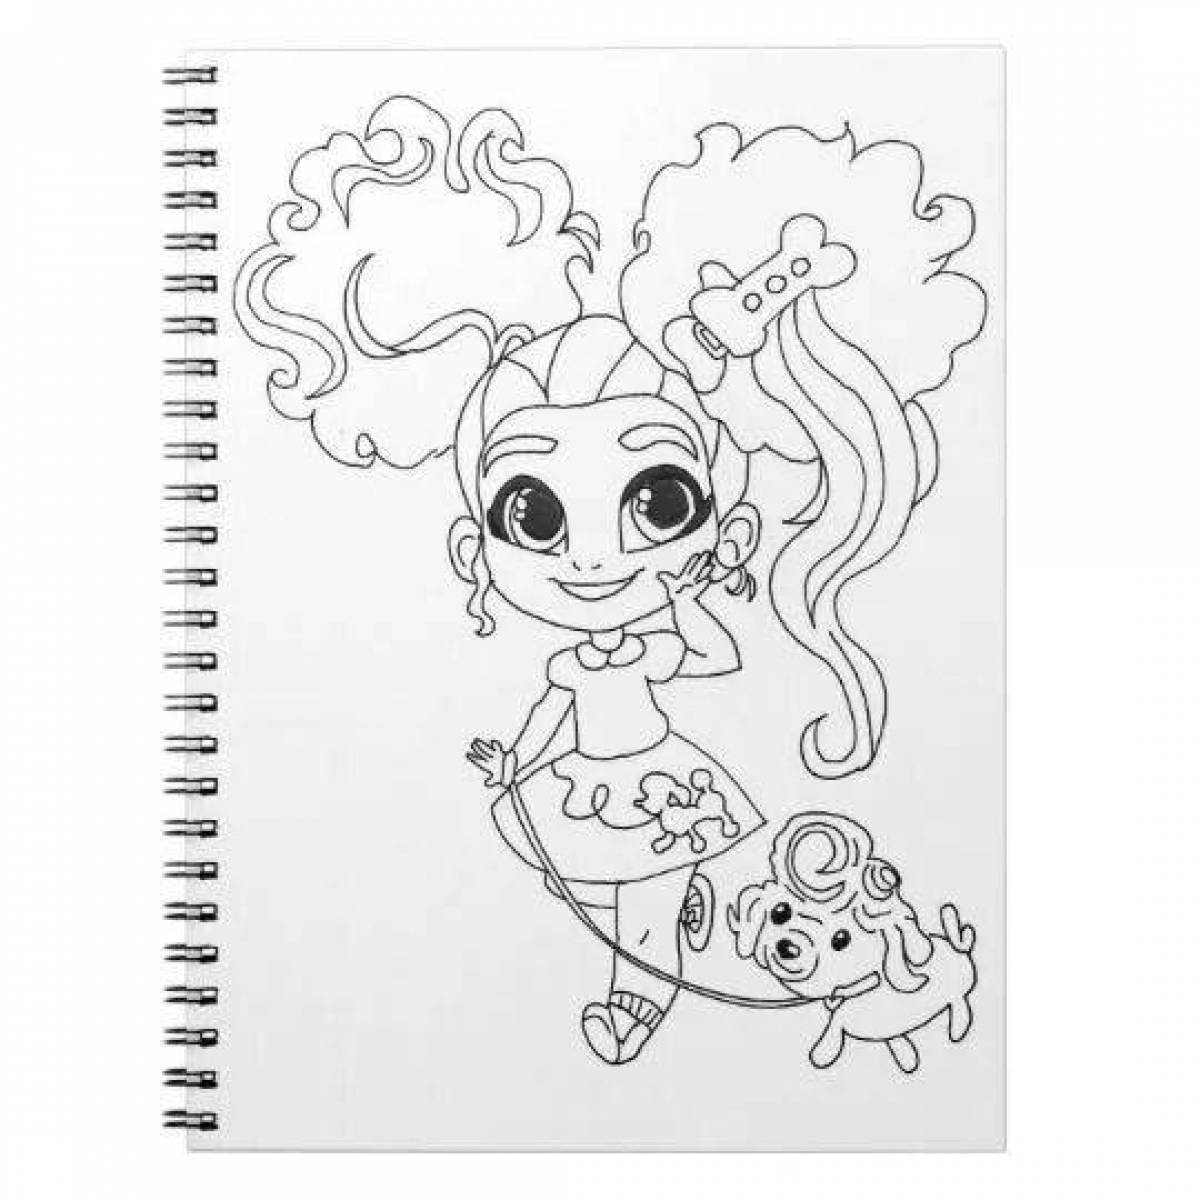 Hairdorables coloring page